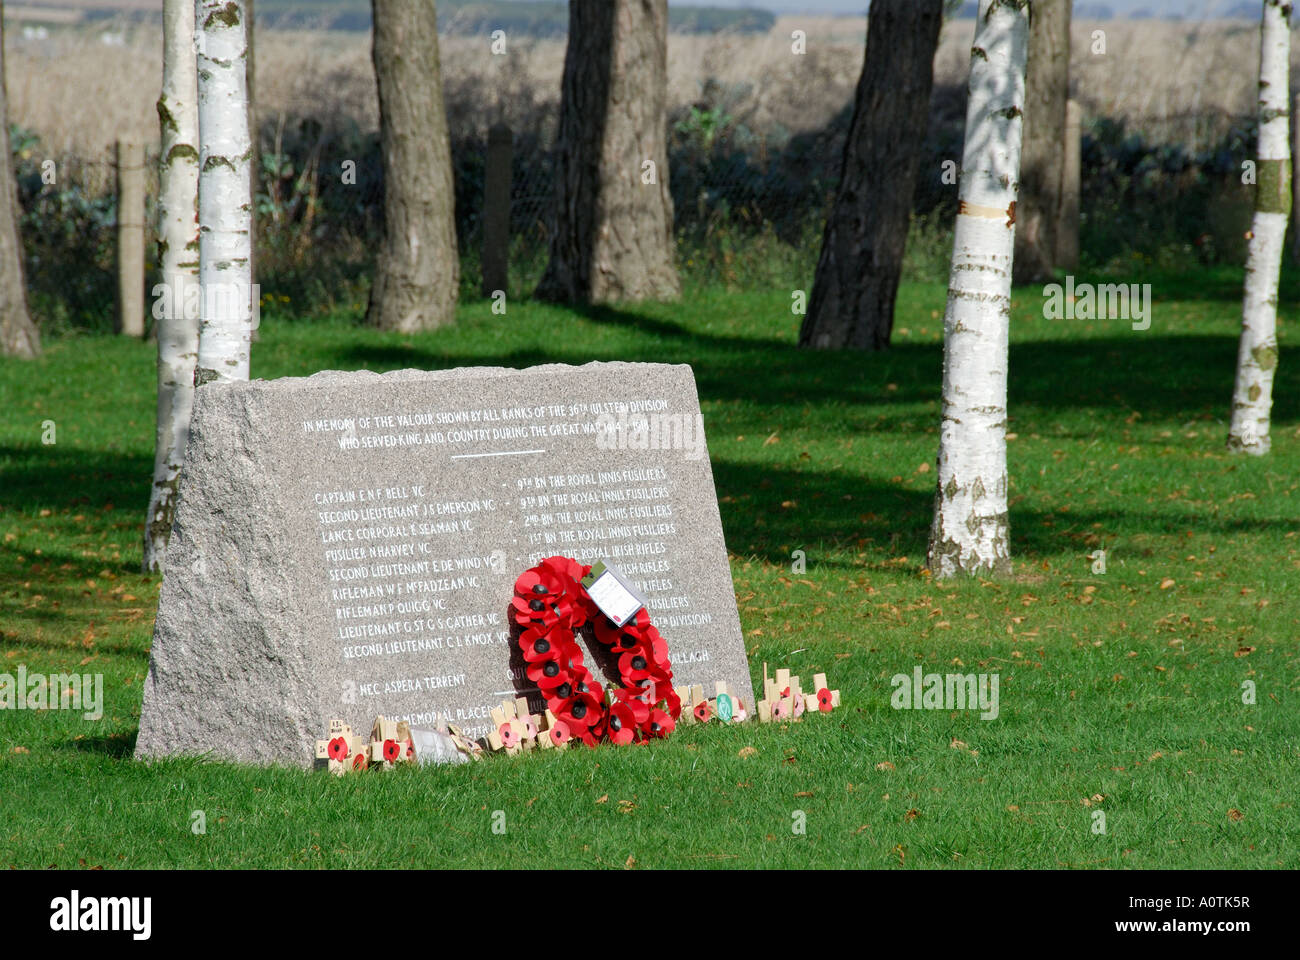 'Memorial to soldiers of 'Ulster regiment' awarded the 'Victoria Cross', 'Authuille Wood', Thiepval, northern France' Stock Photo